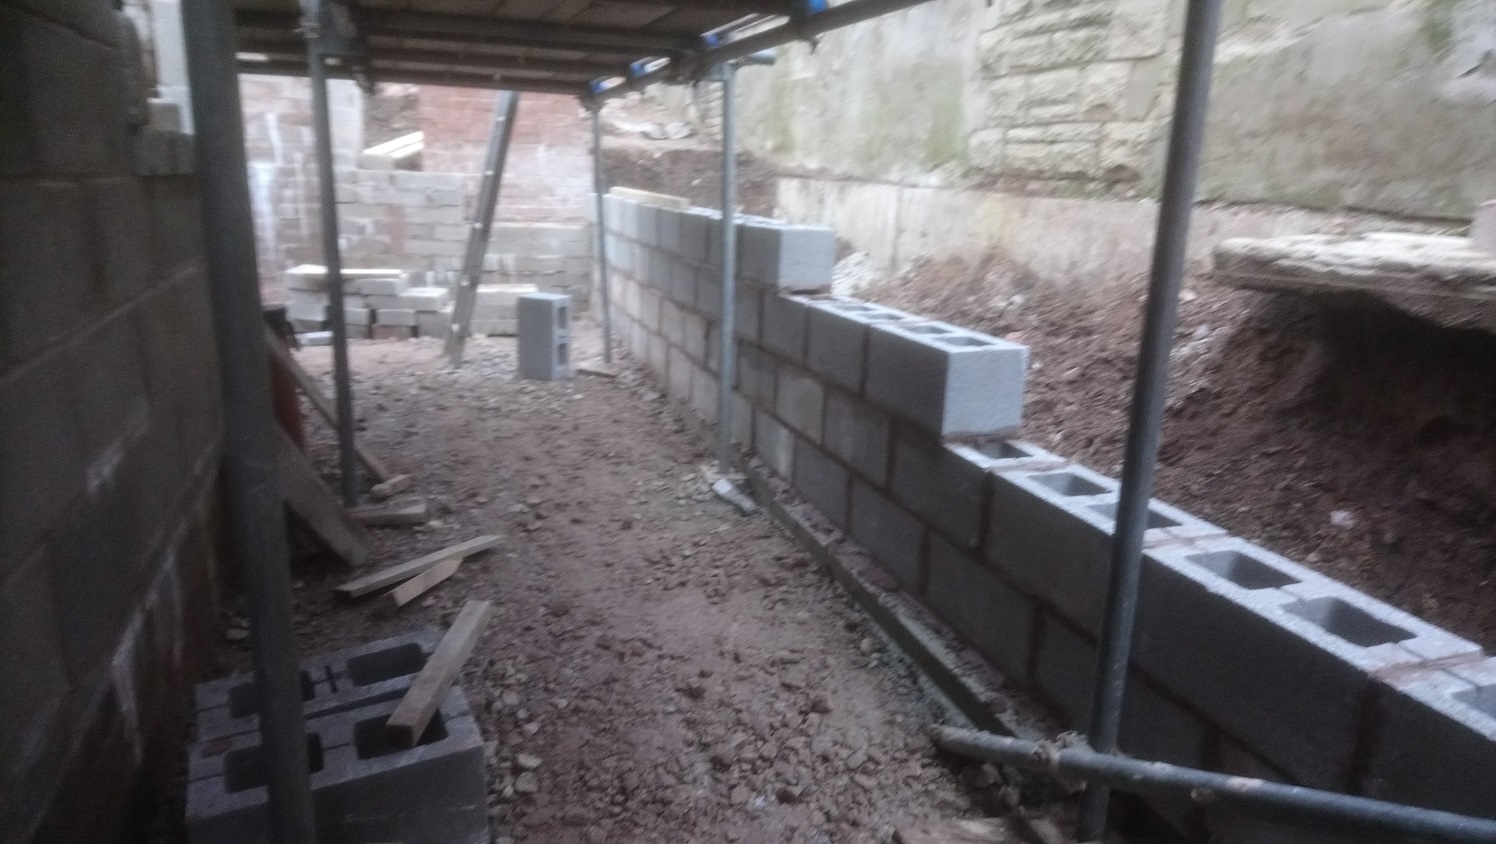 Build parallel to retaining wall